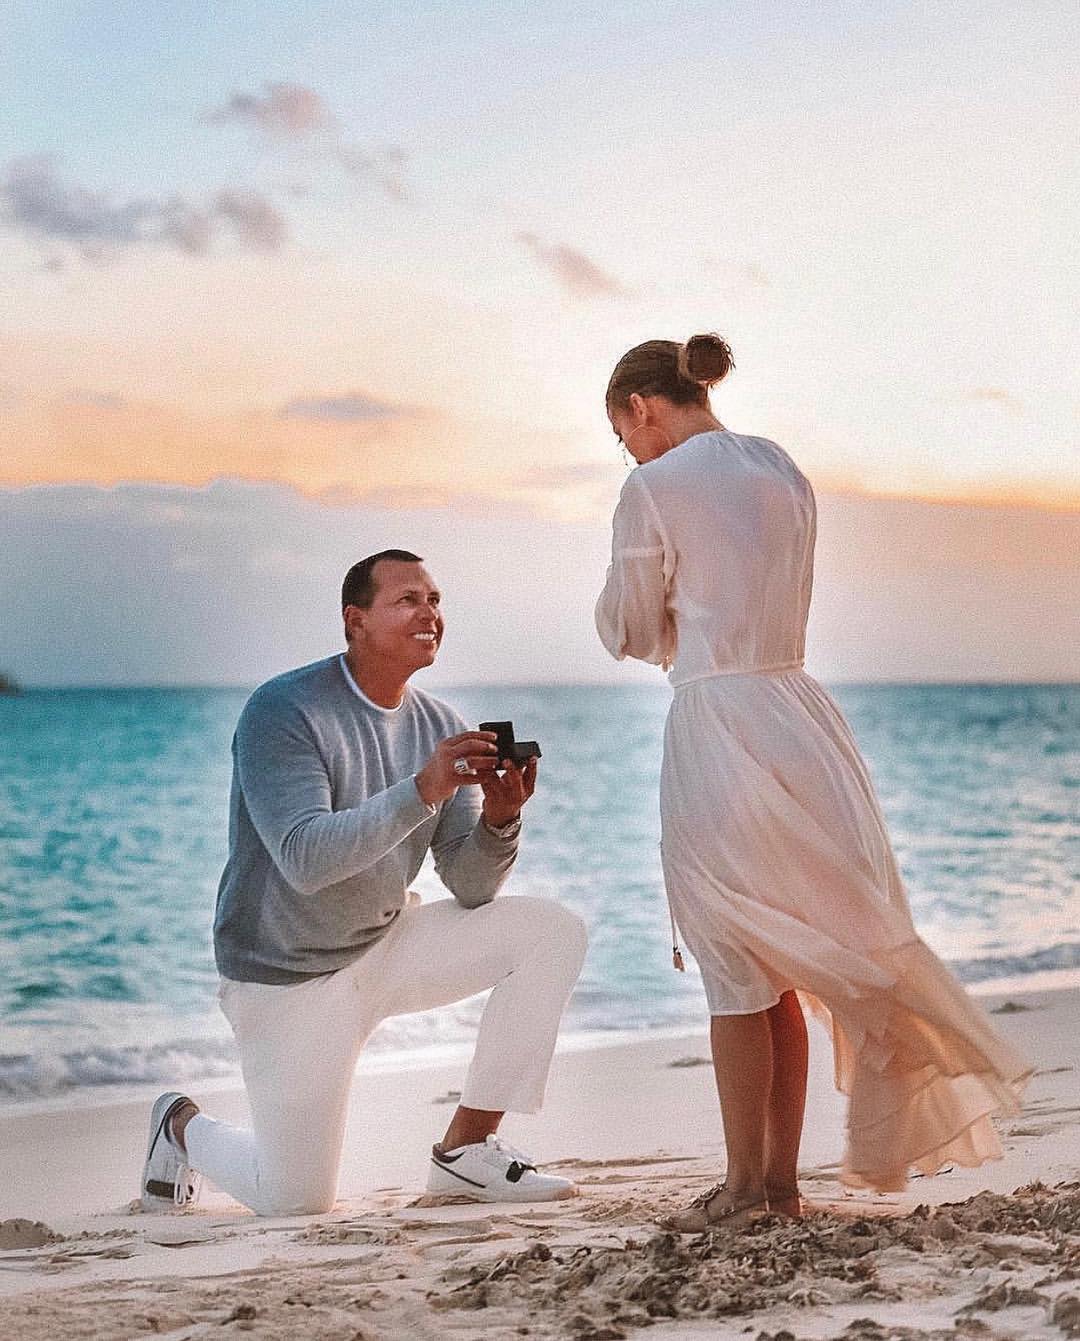 JLO says Yes - engaged to arod